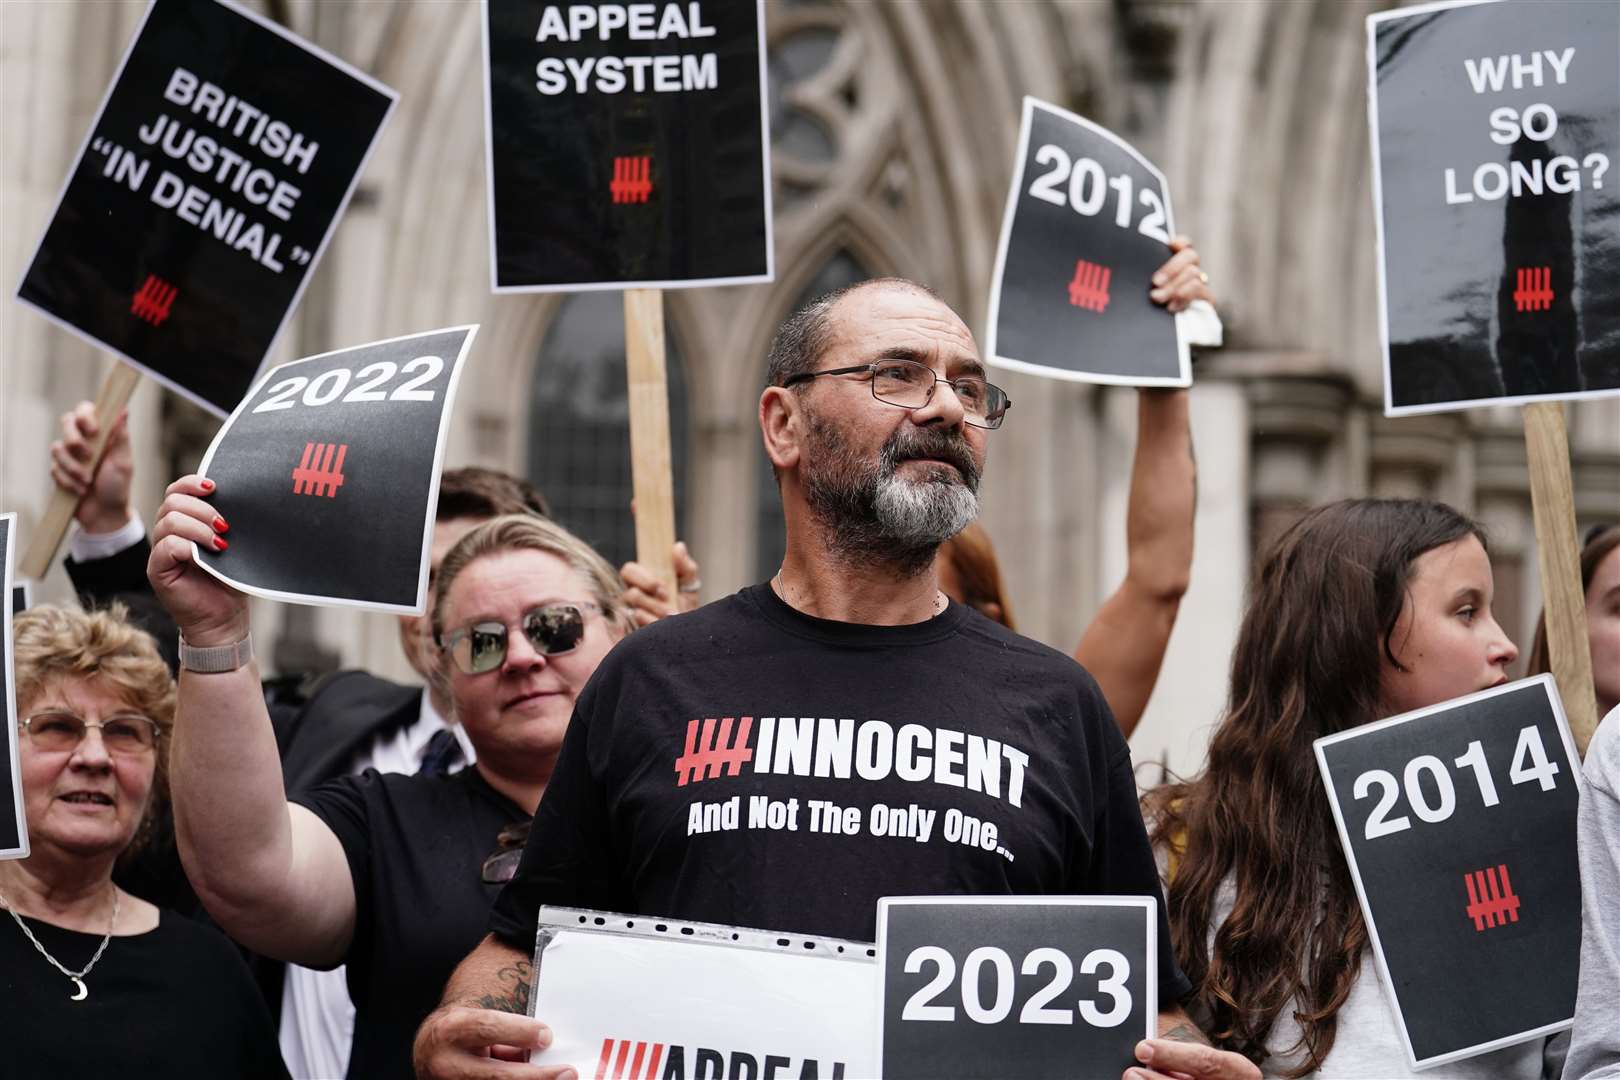 Andrew Malkinson, who served 17 years in prison for a rape he did not commit, outside the Royal Courts of Justice after being cleared by the Court of Appeal (Jordan Pettitt/PA)